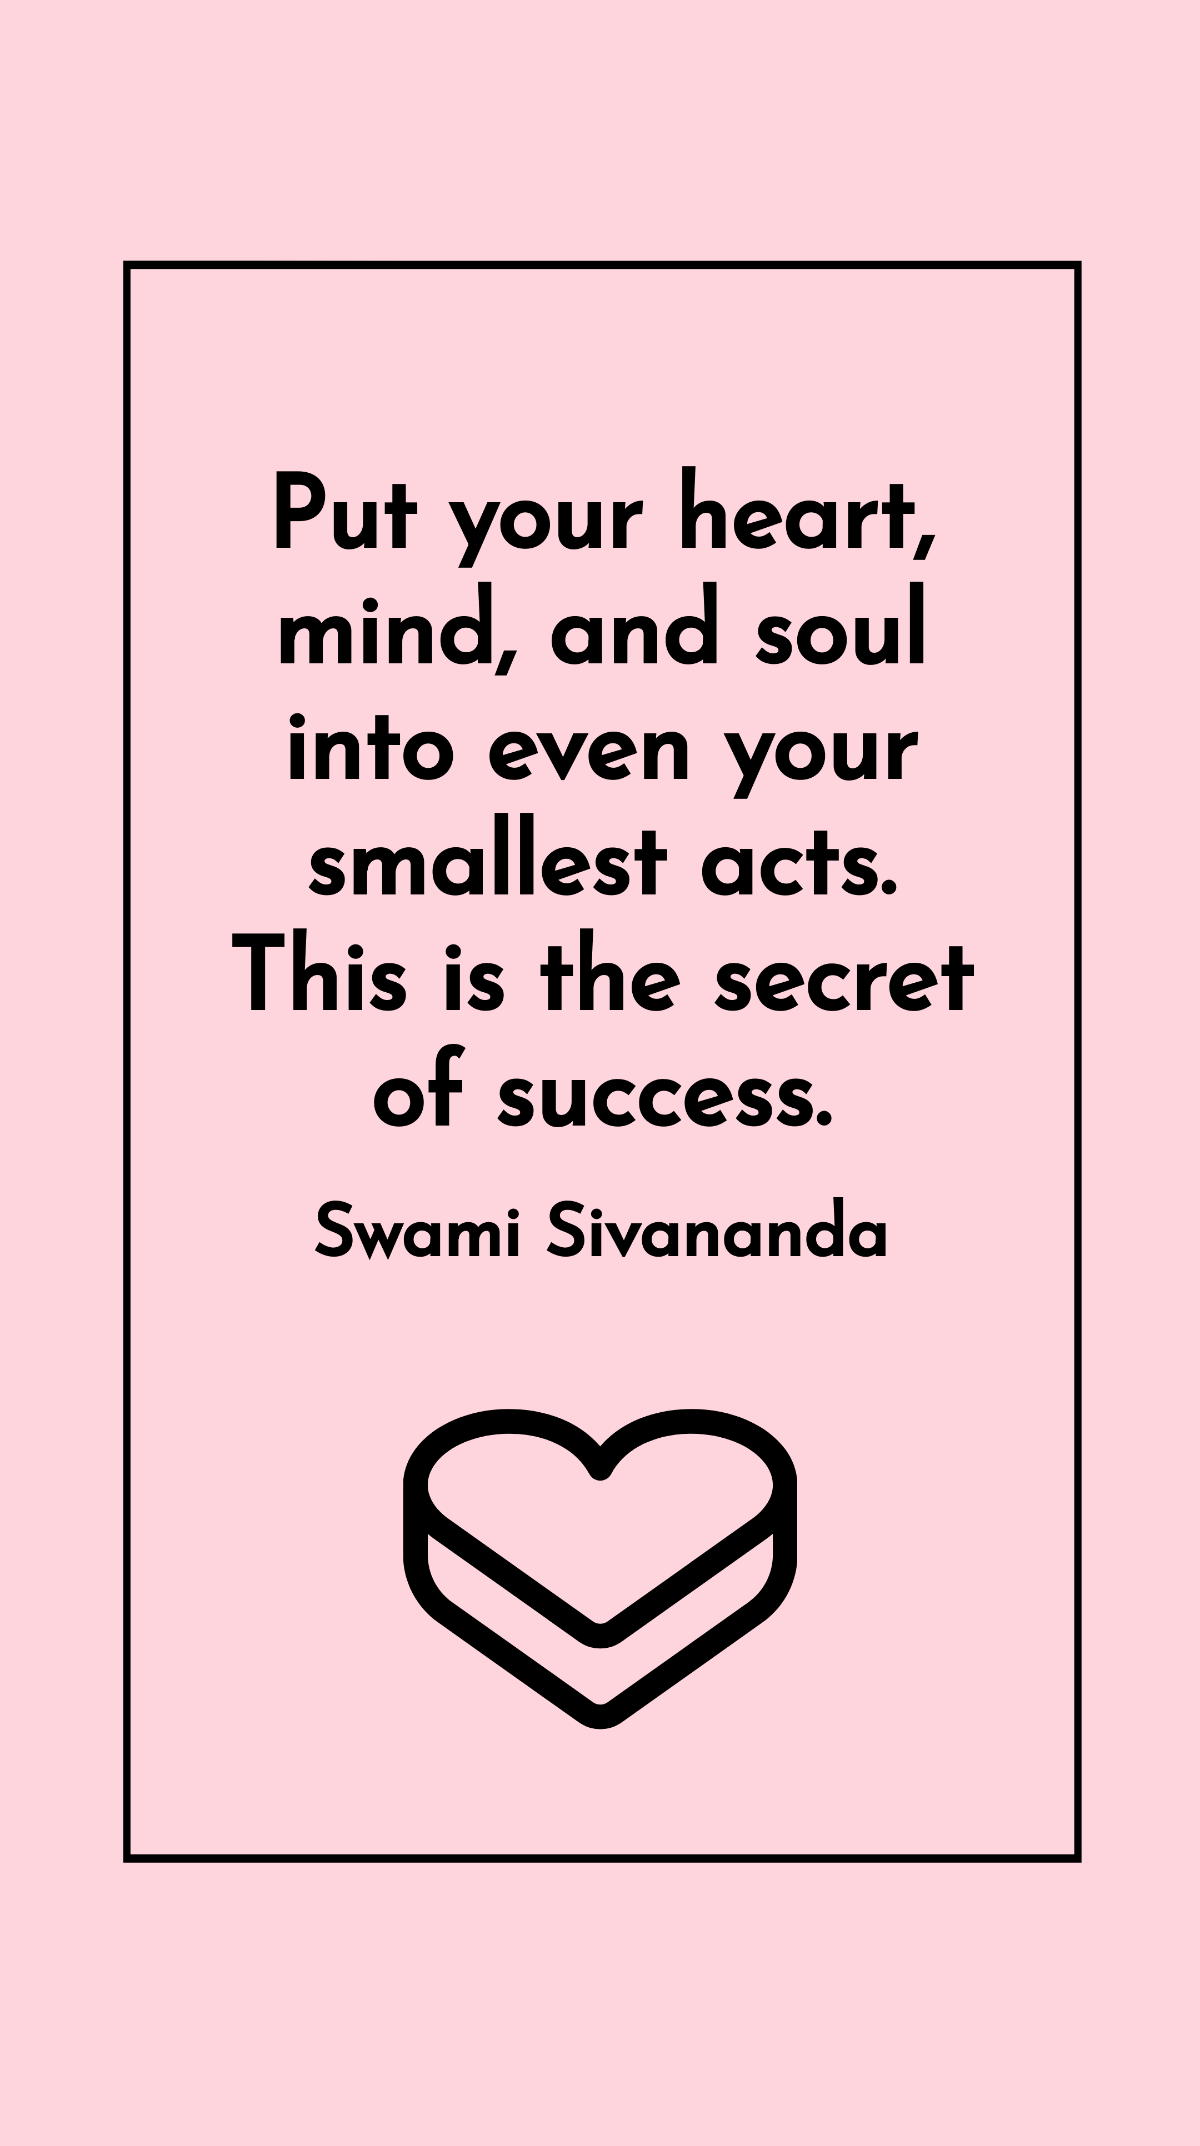 Free Swami Sivananda - Put your heart, mind, and soul into even your smallest acts. This is the secret of success. Template